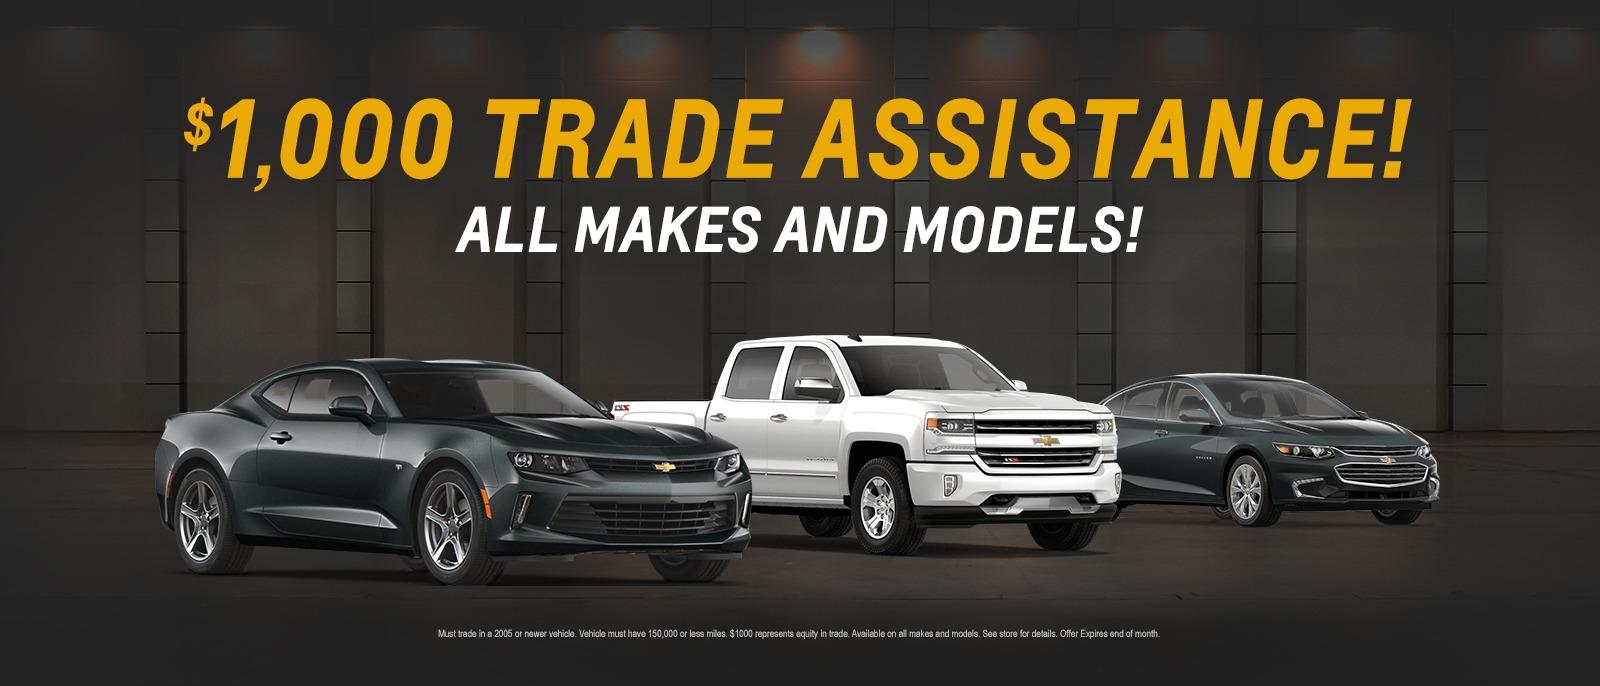 $1,000 Trade Assistance - All Makes and Models